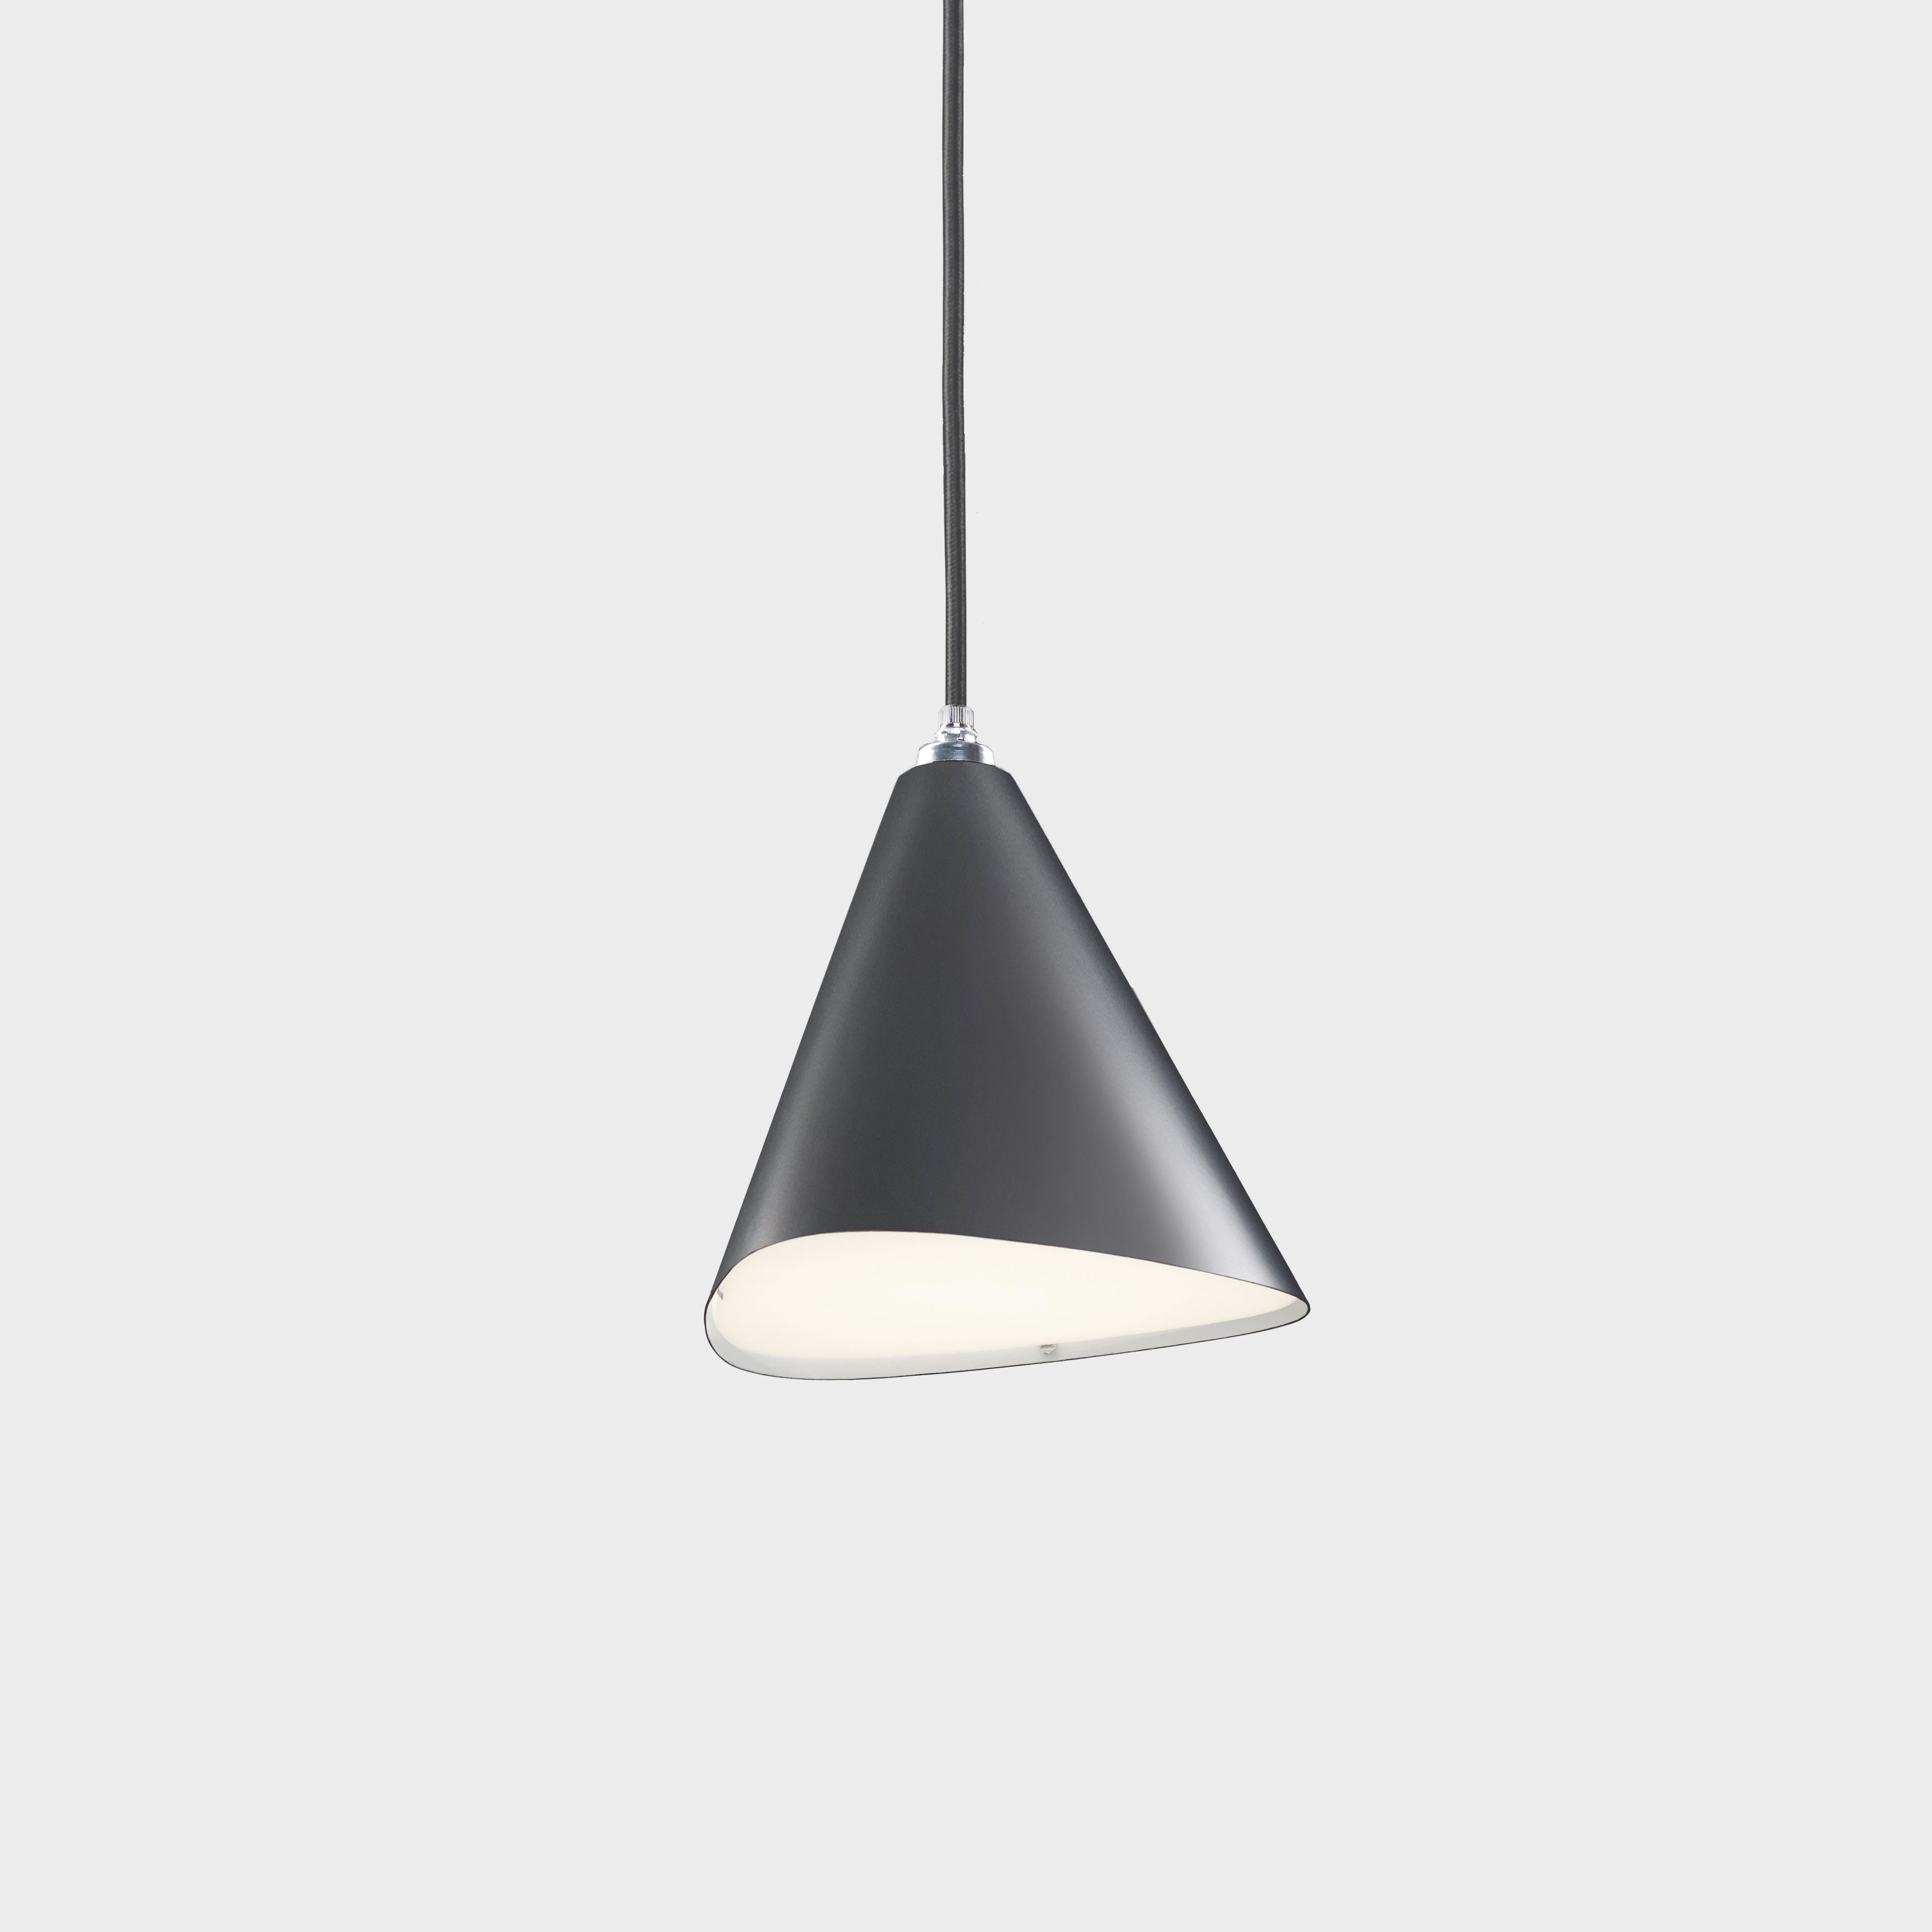 Daniel Becker 'Emily III' pendant lamp in anthracite. Designed by Berlin luminary Daniel Becker and handmade to order using midcentury manufacturing techniques. Executed in high-quality sheet metal with up to ten layers glossy or matte black paint